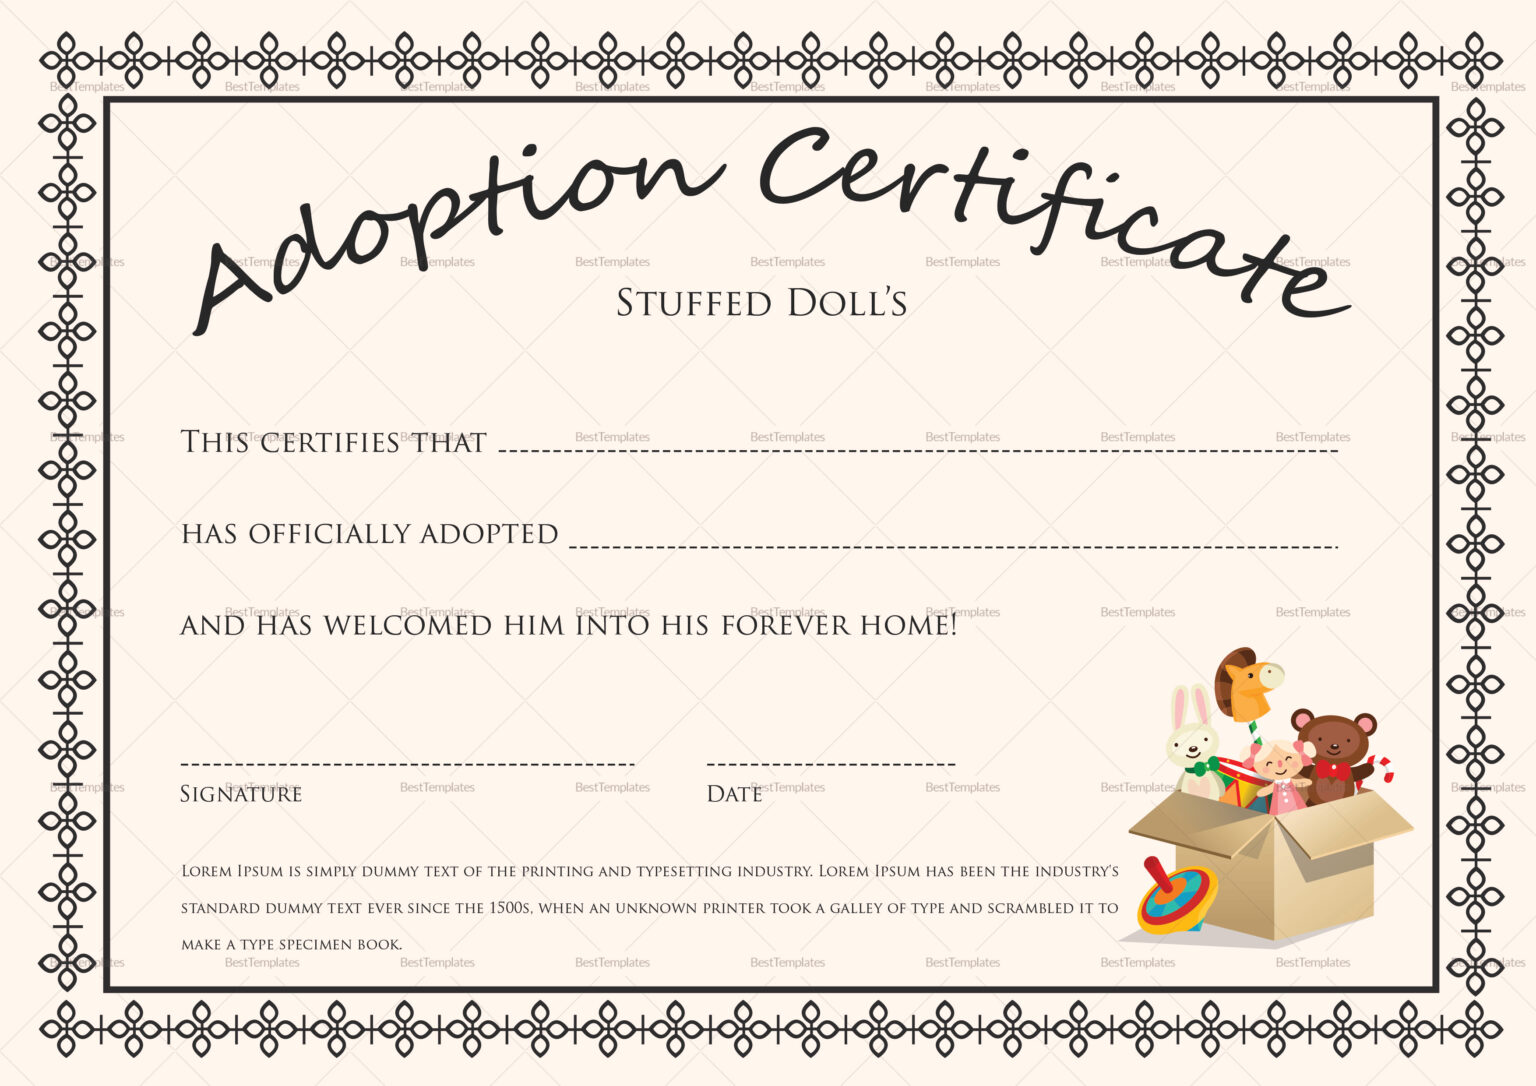 Blank Adoption Certificate Template Calep midnightpig co With Blank